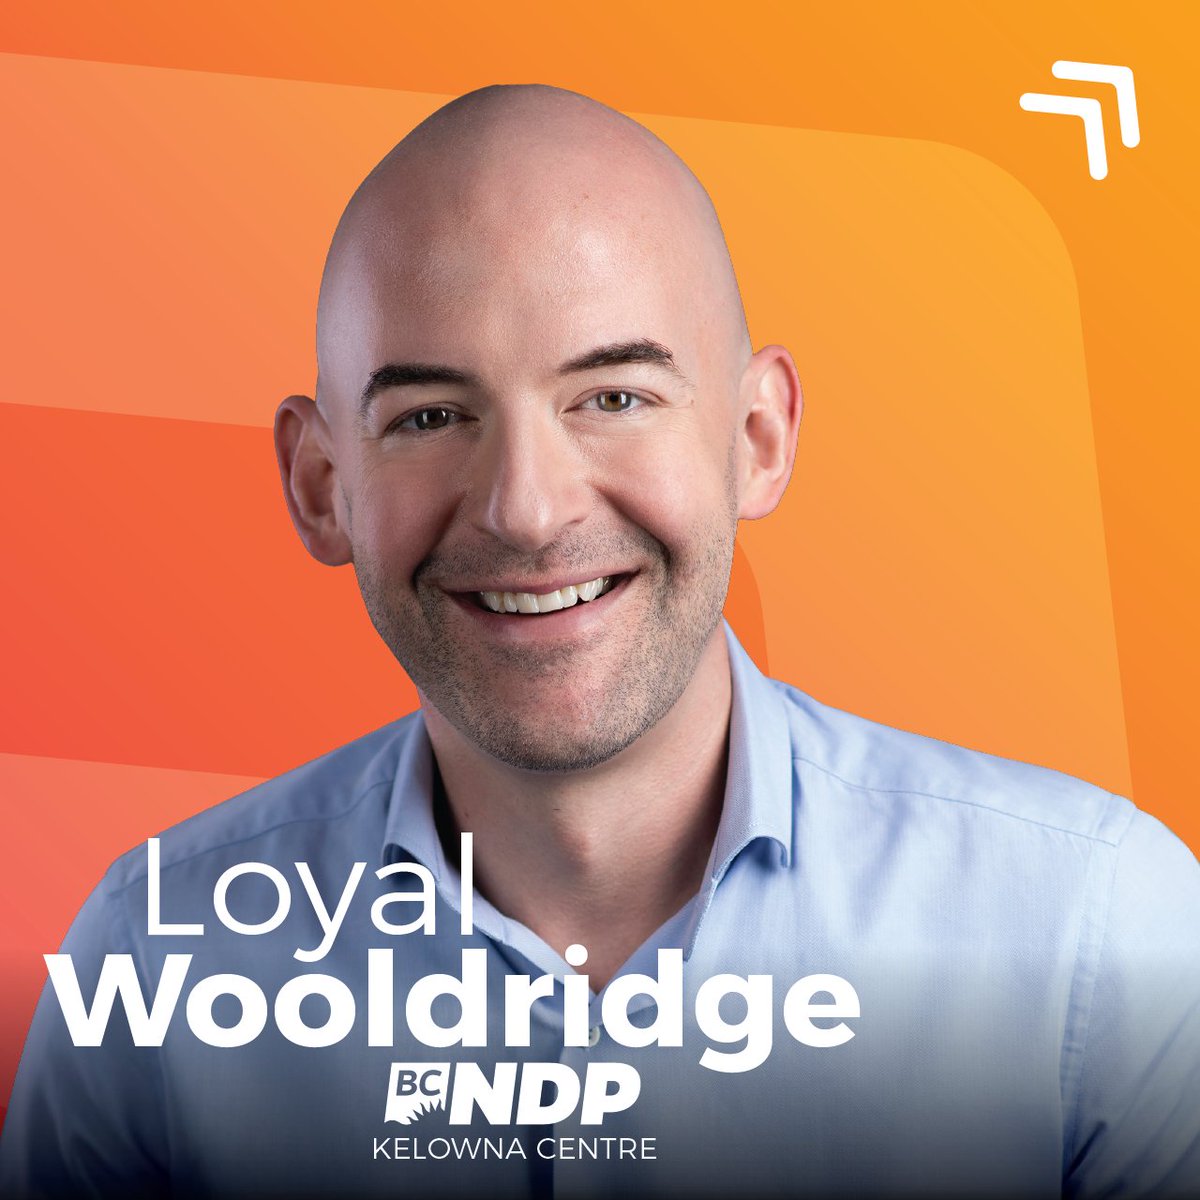 It's official. Loyal Wooldridge is the BC NDP’s candidate in Kelowna Centre and he’s ready to get to work on the things that matter most to people. Loyal is an entrepreneur, social equity advocate, and a two-time city Kelowna city councillor. Welcome Loyal!